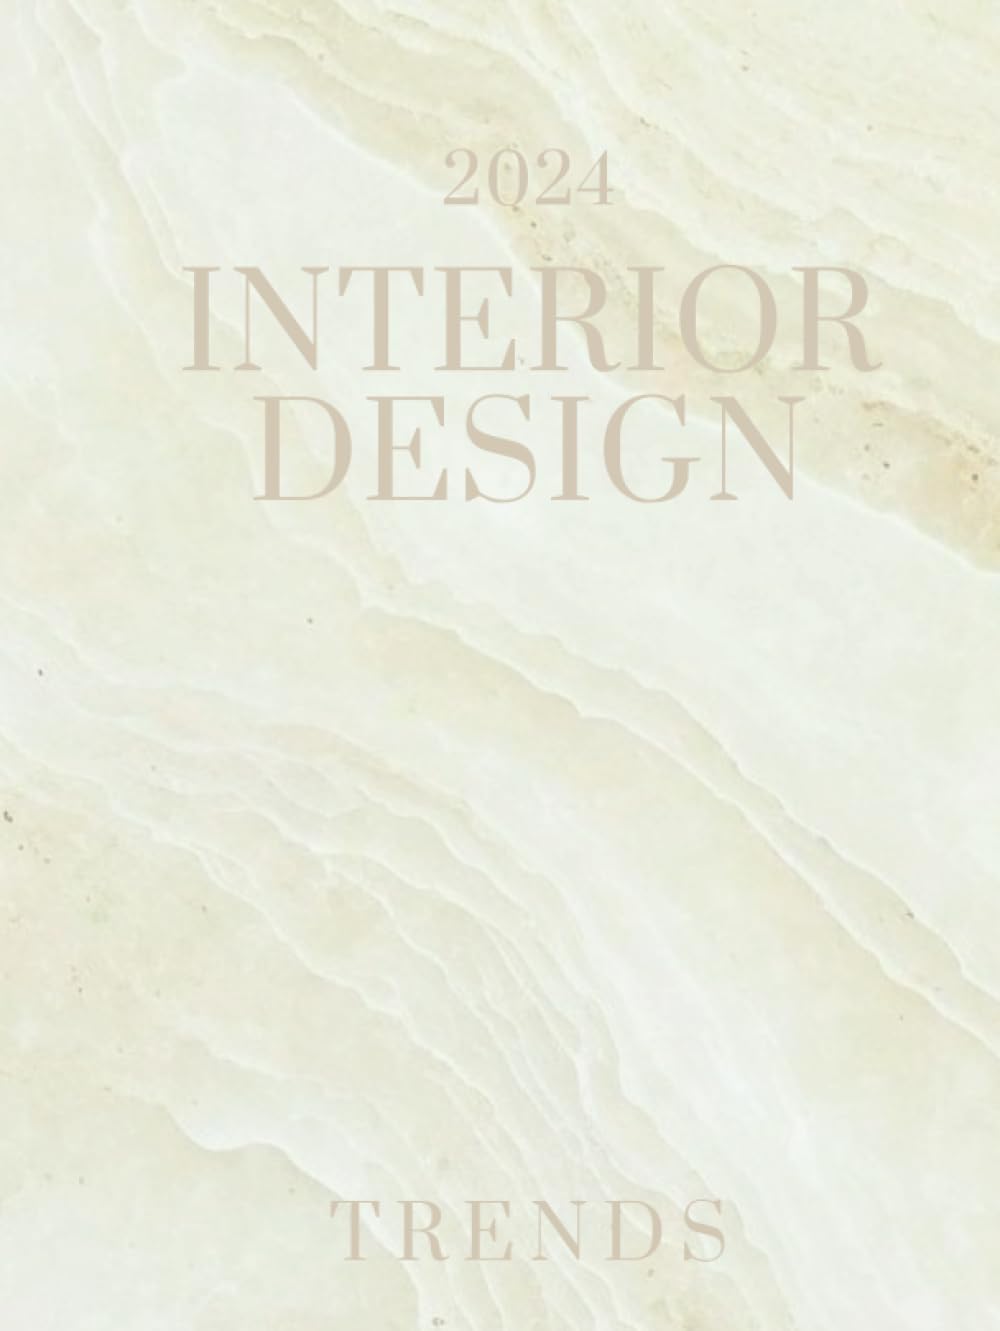 Interior Design Trends 2024: Lean Into Minimalism, Modernism with this Hardcover Coffee Table Book To Furnish, Decorate and Style Your Décor Space